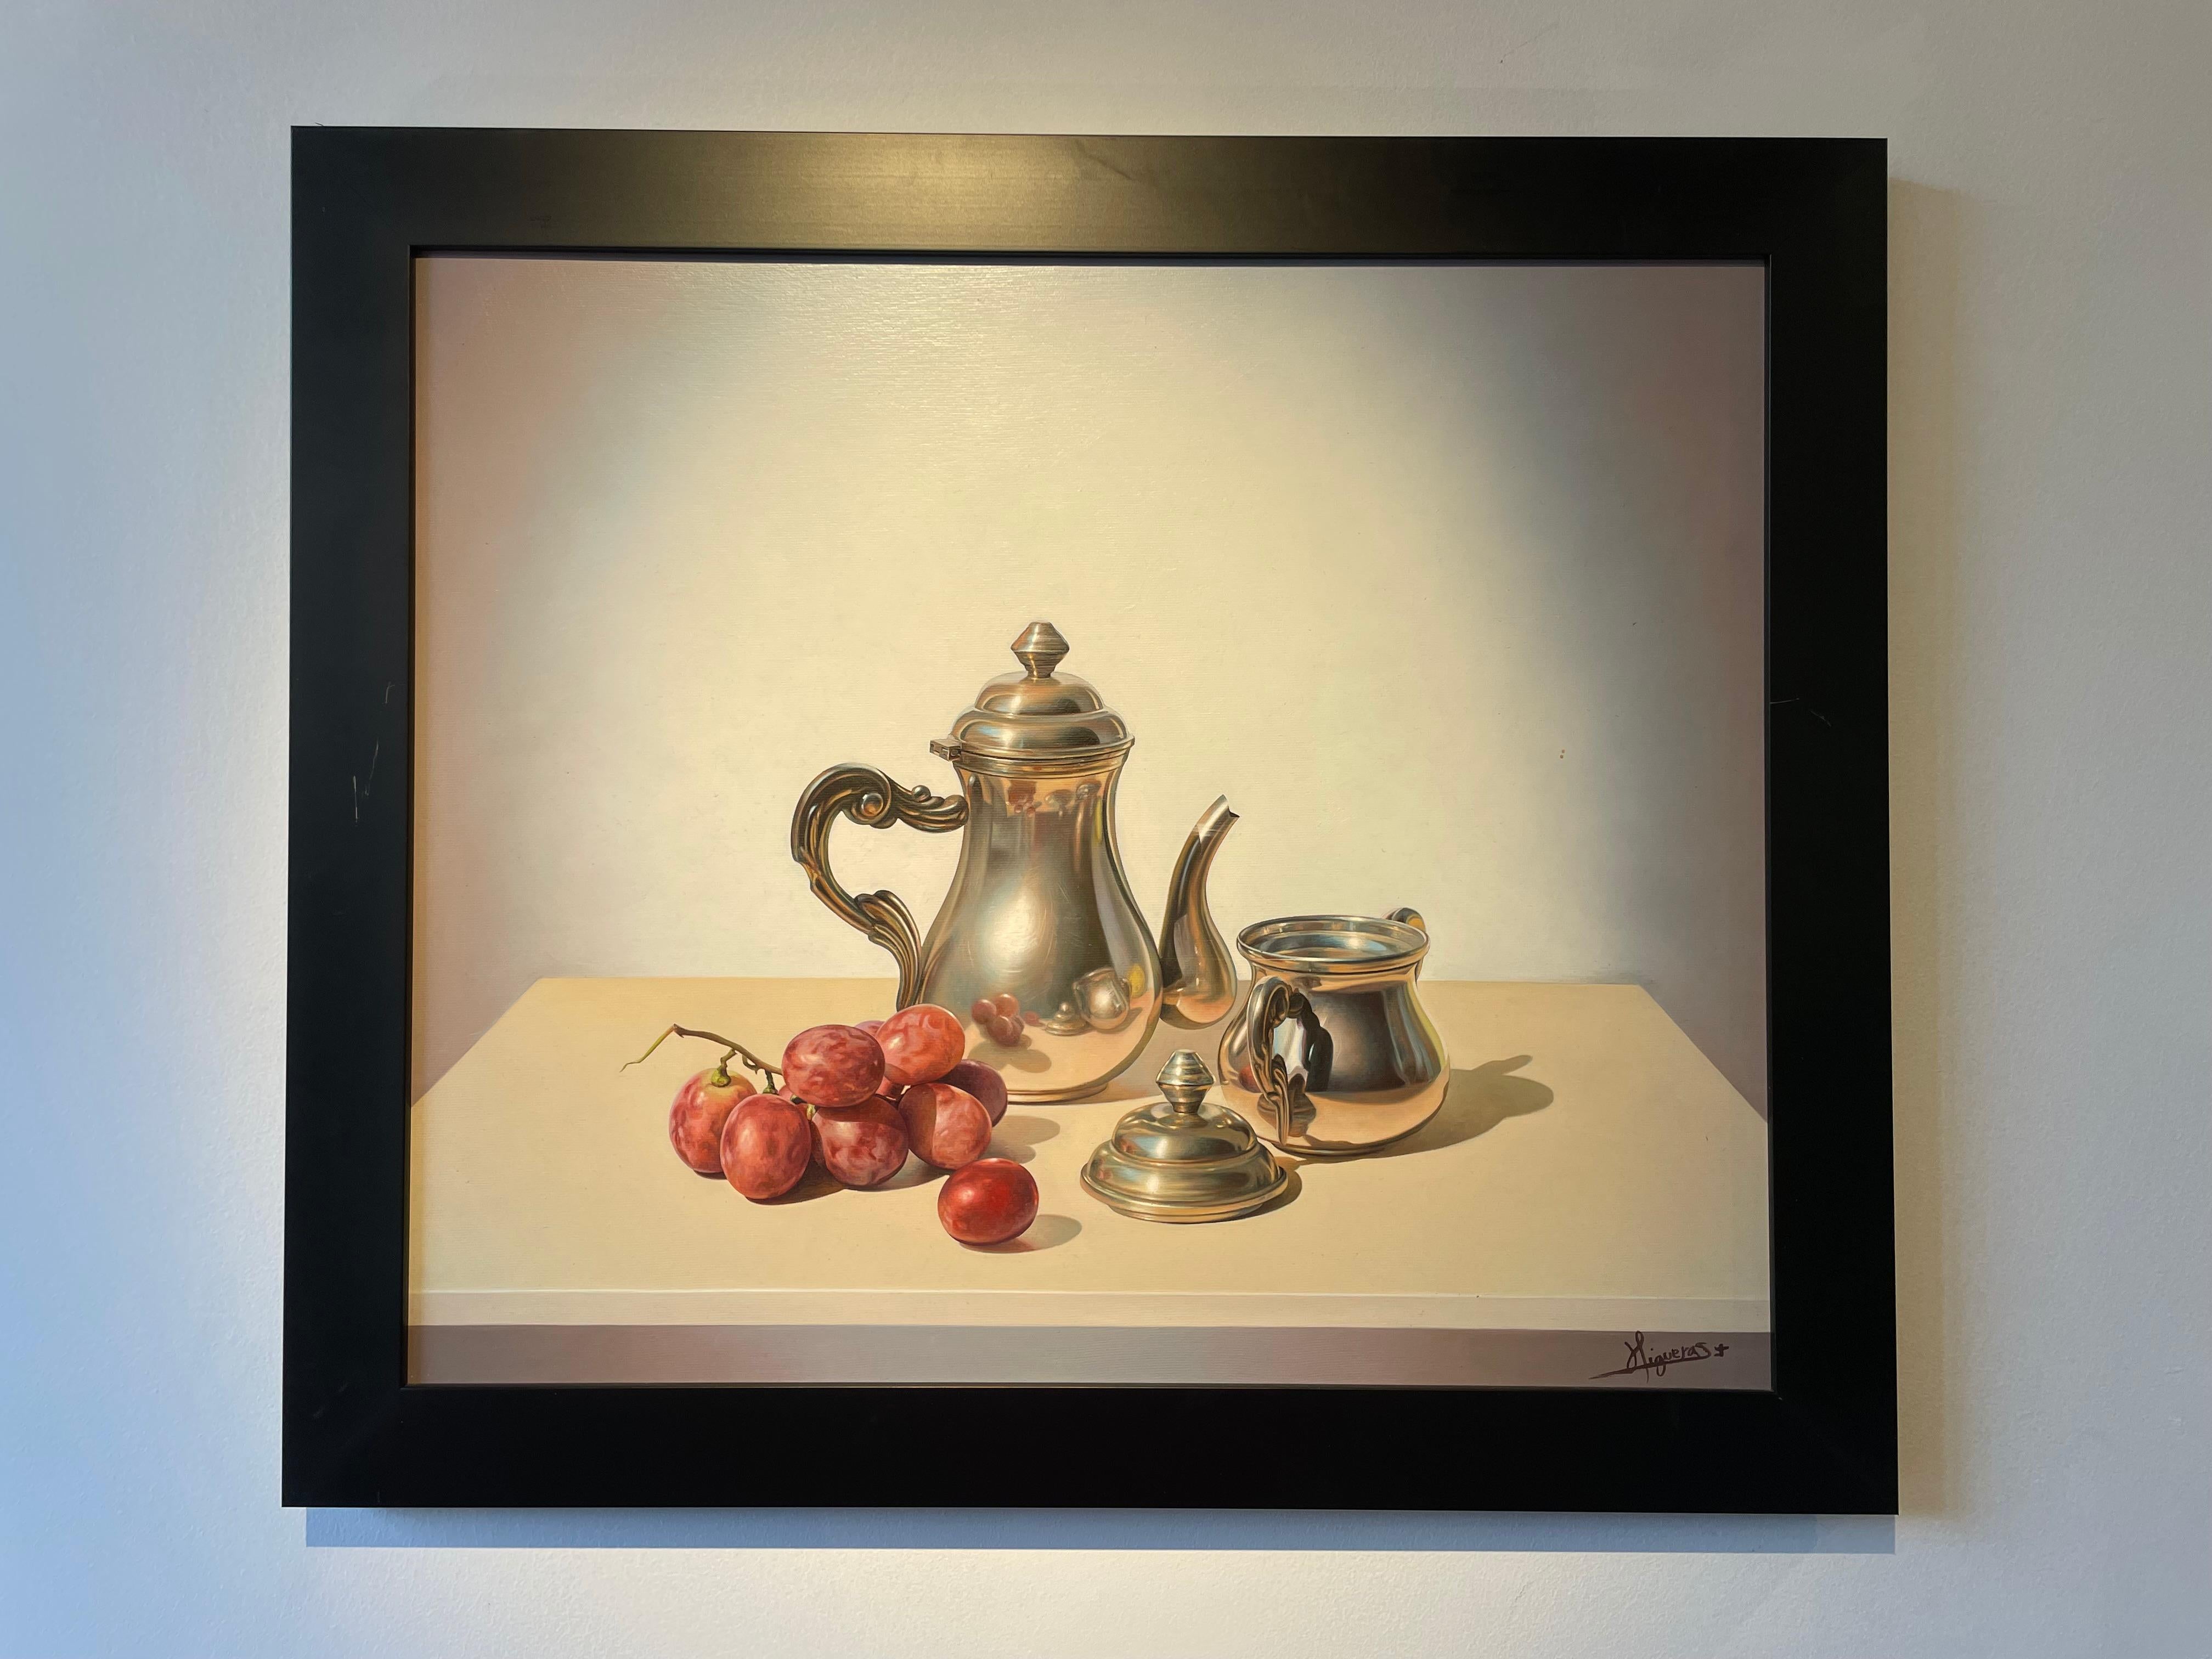 Manolo Higueras Still-Life Painting - 'Still Life with Grapes' Contemporary painting of Silverware, Coffee pot & Fruit